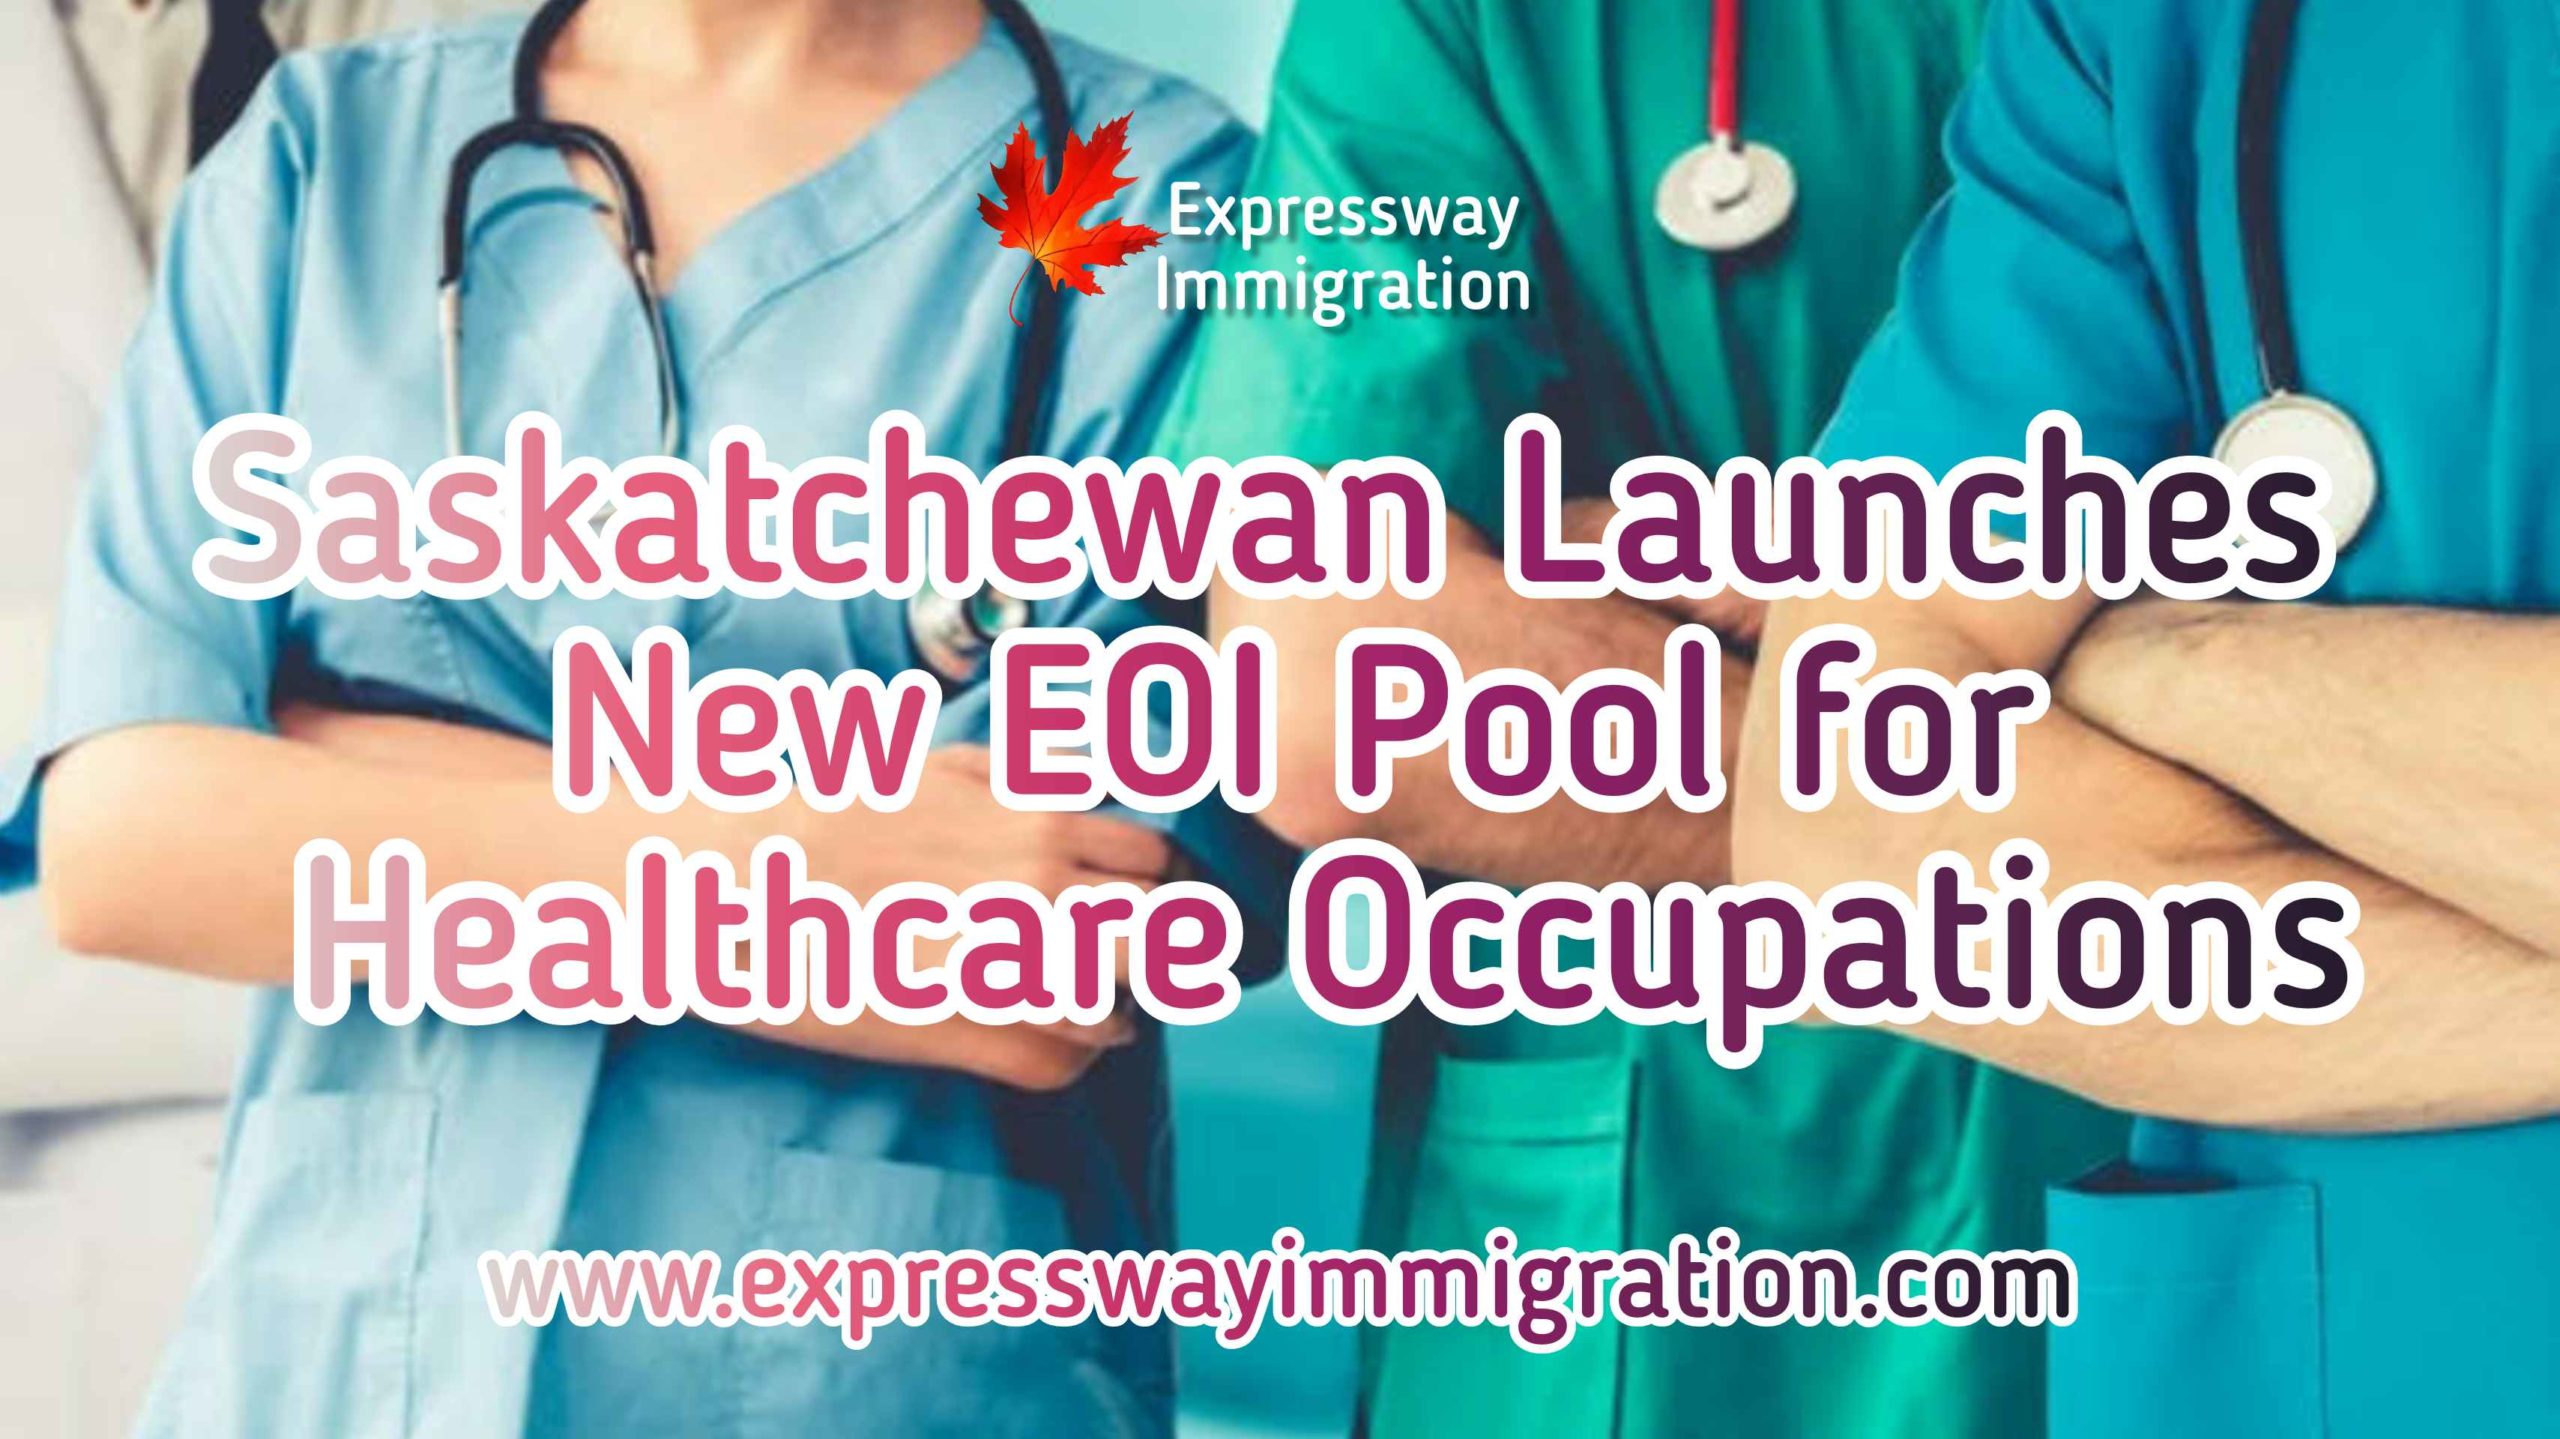 Saskatchewan Launches New EOI Pool Targeting 21 Healthcare Occupations For Canada Immigration